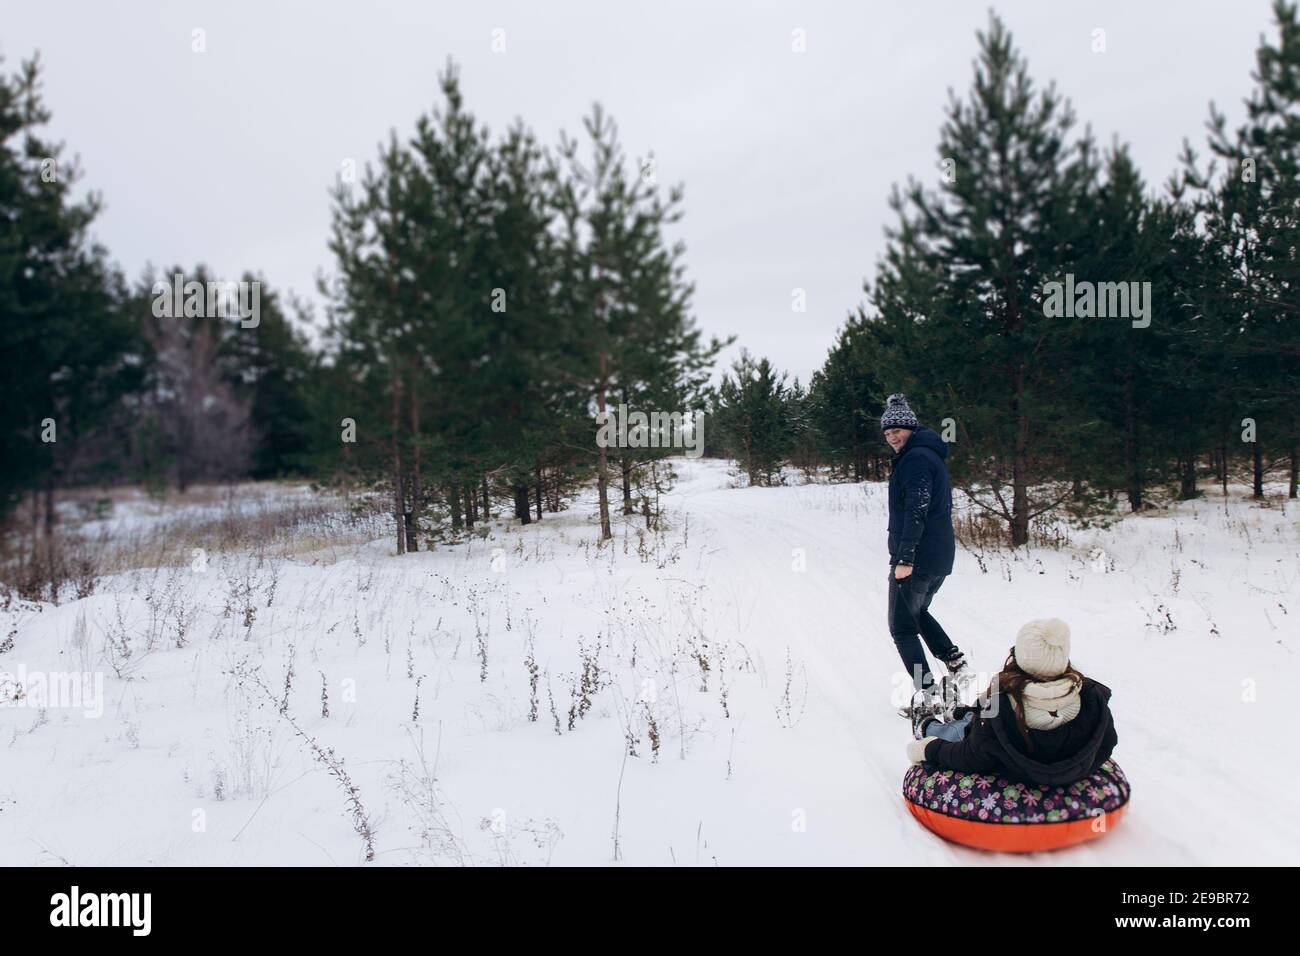 A man in warm winter clothes rolls women on a red tubing.  Stock Photo